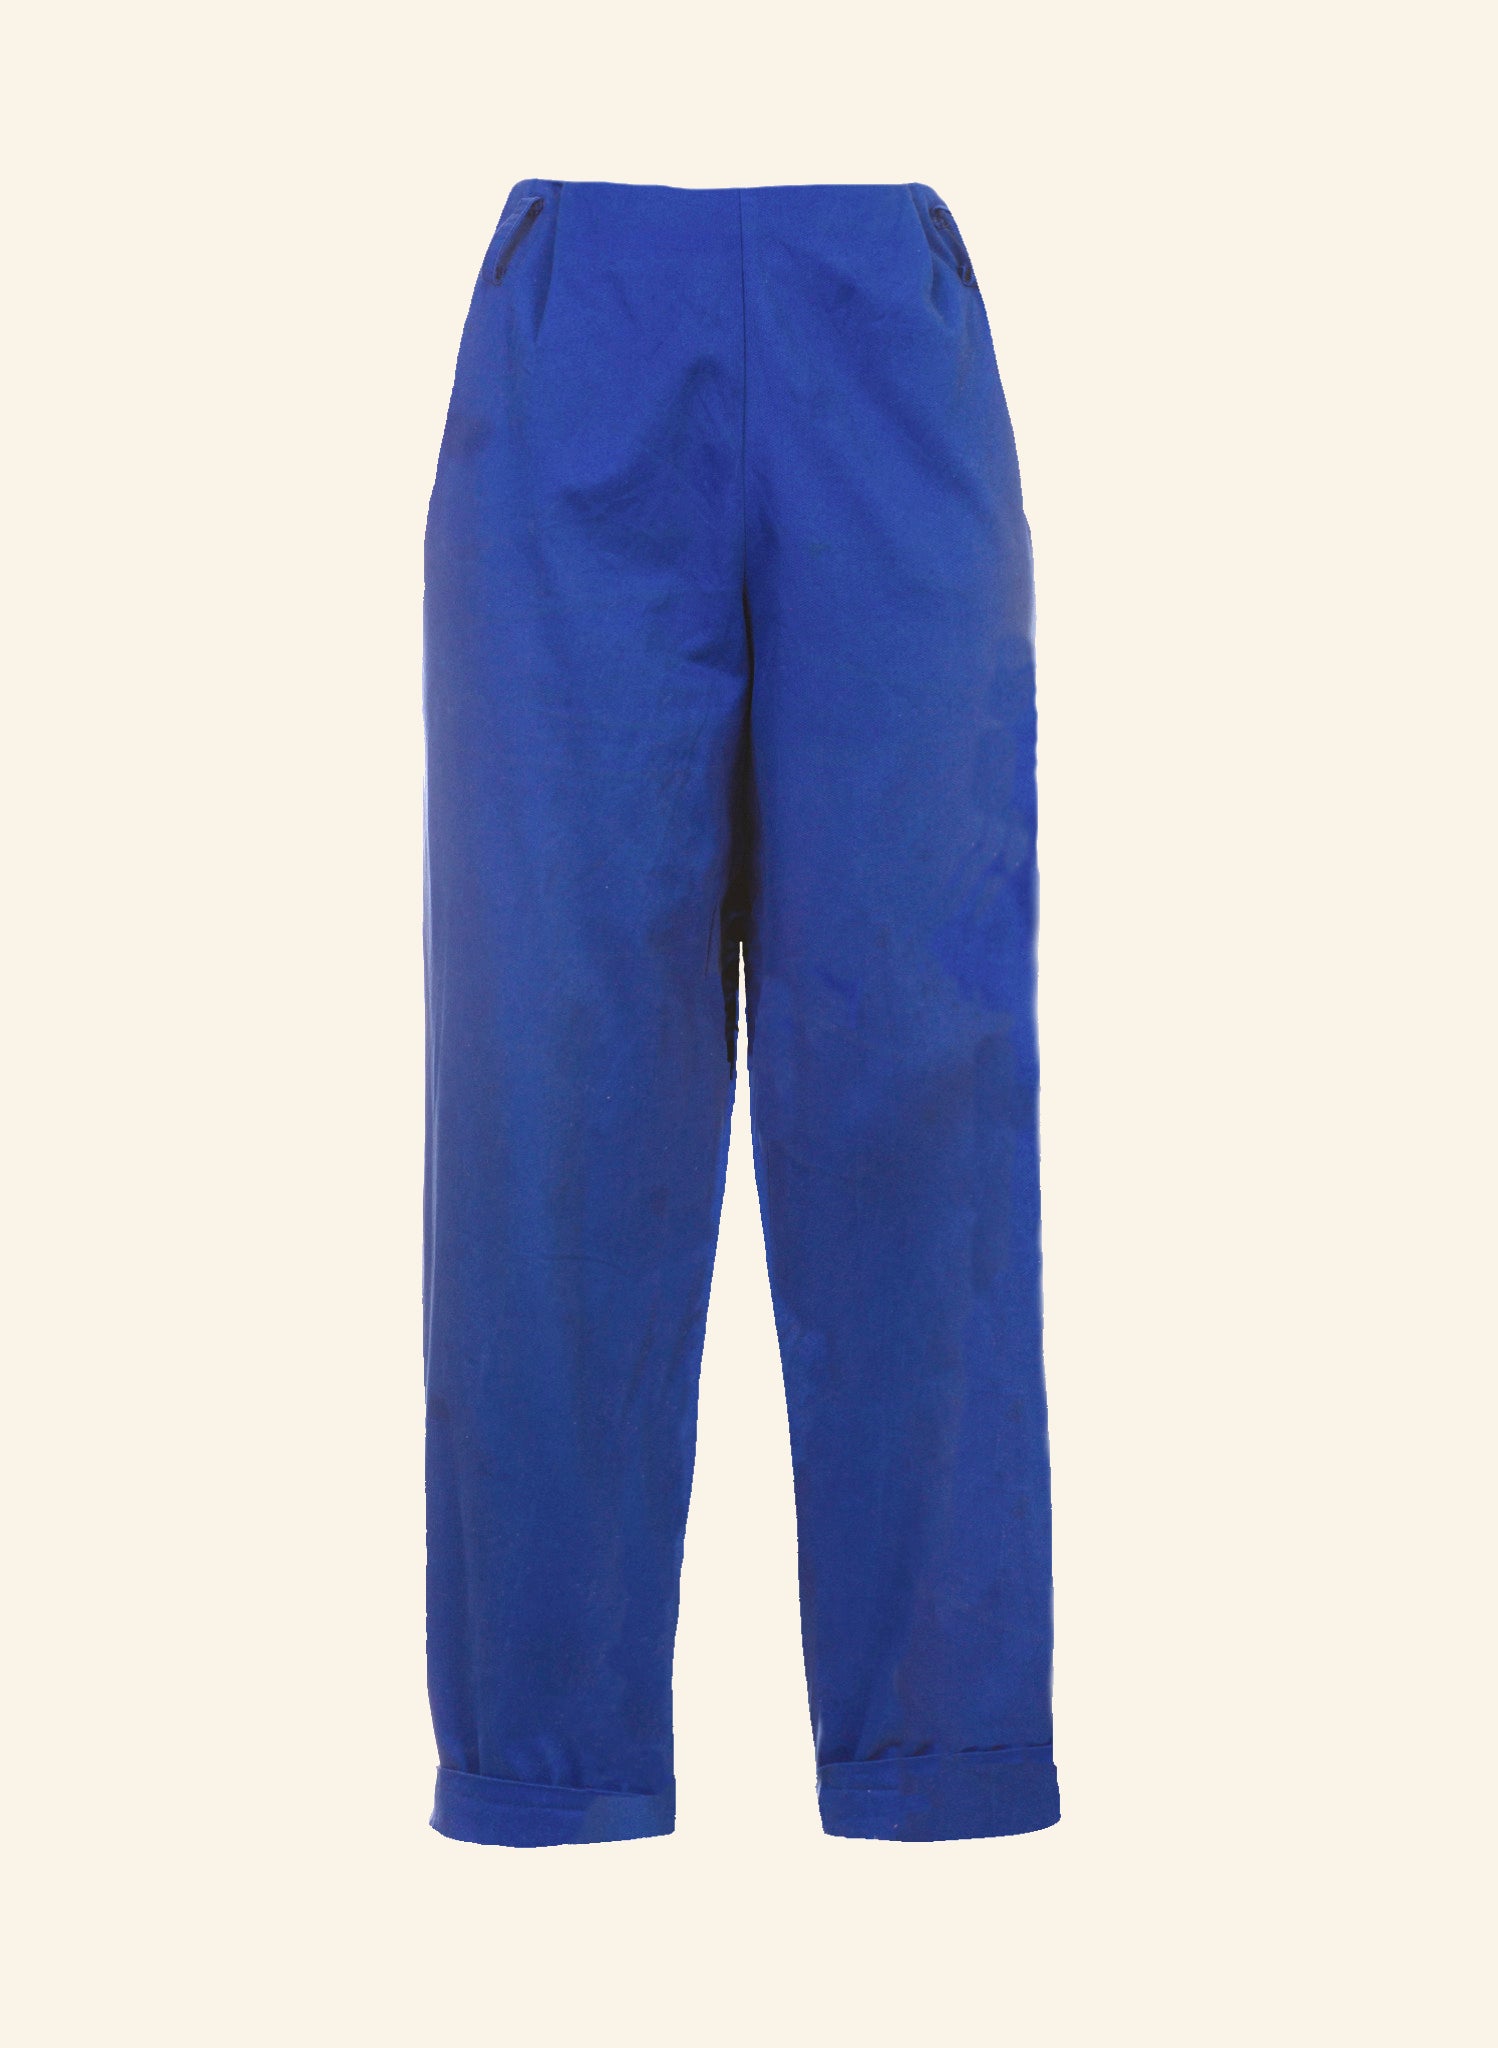 Wilma Trousers - Cobalt Blue Cotton